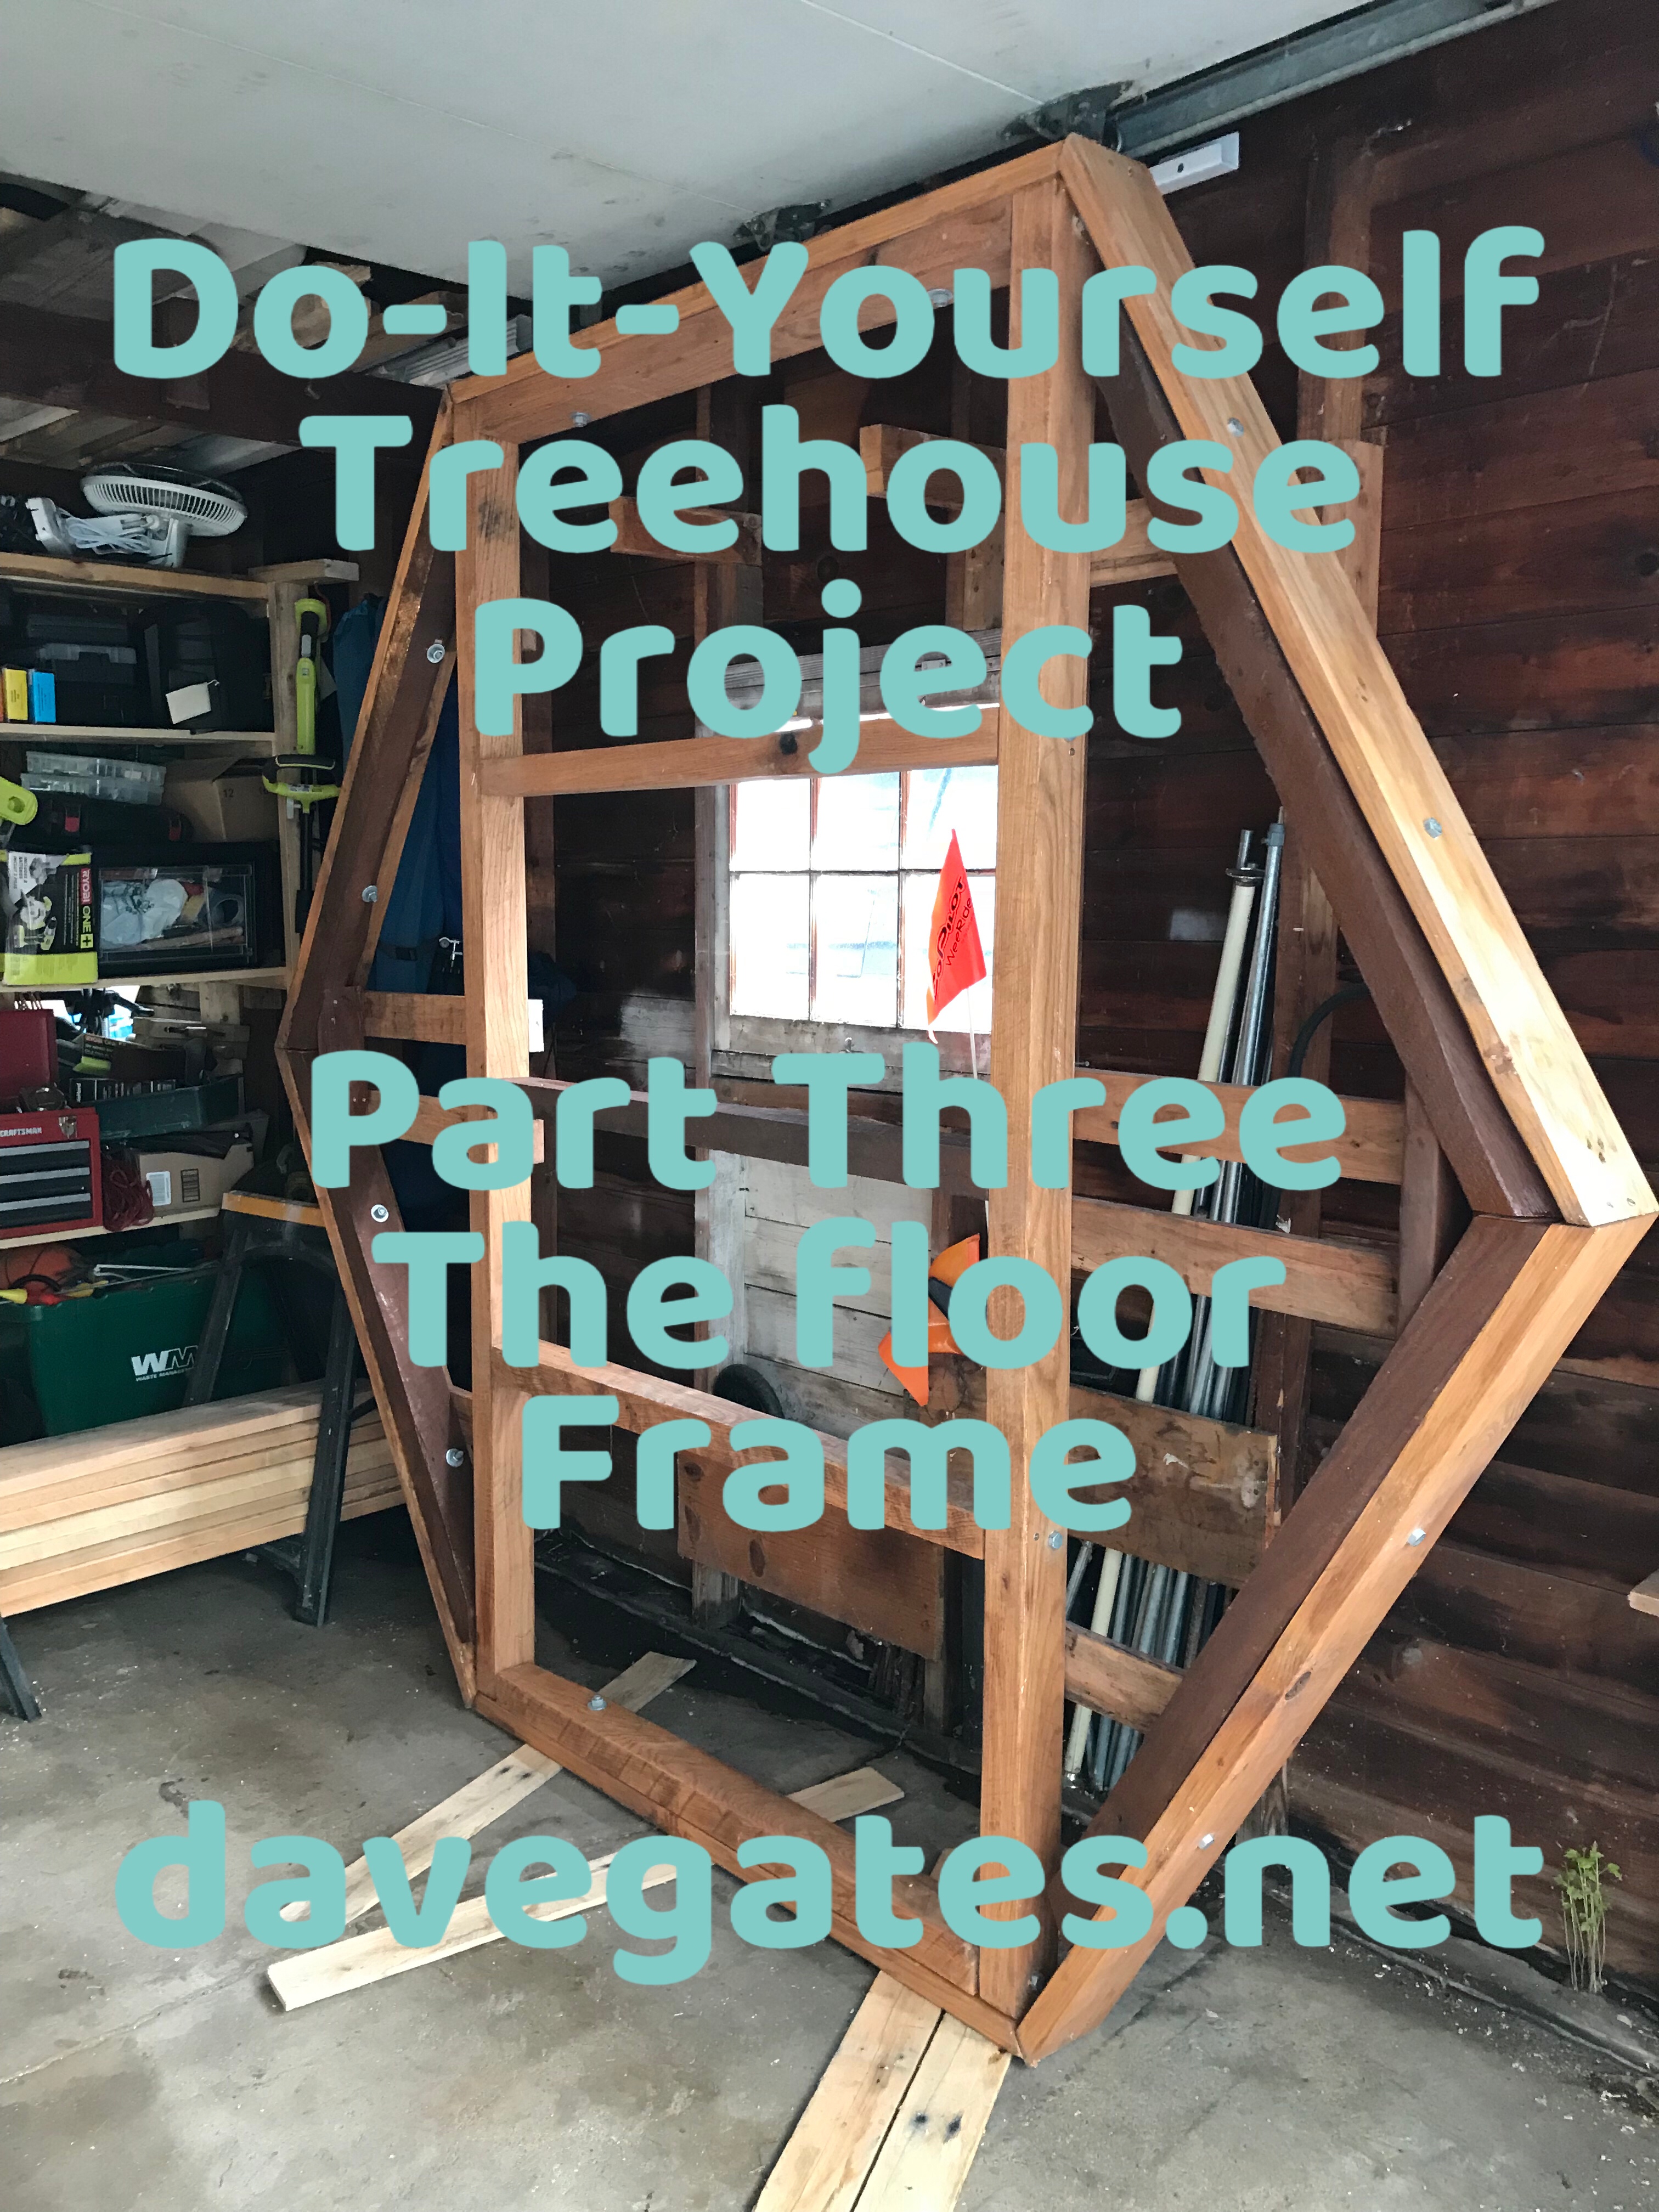 Do-It-Yourself Treehouse Project Floor Frame